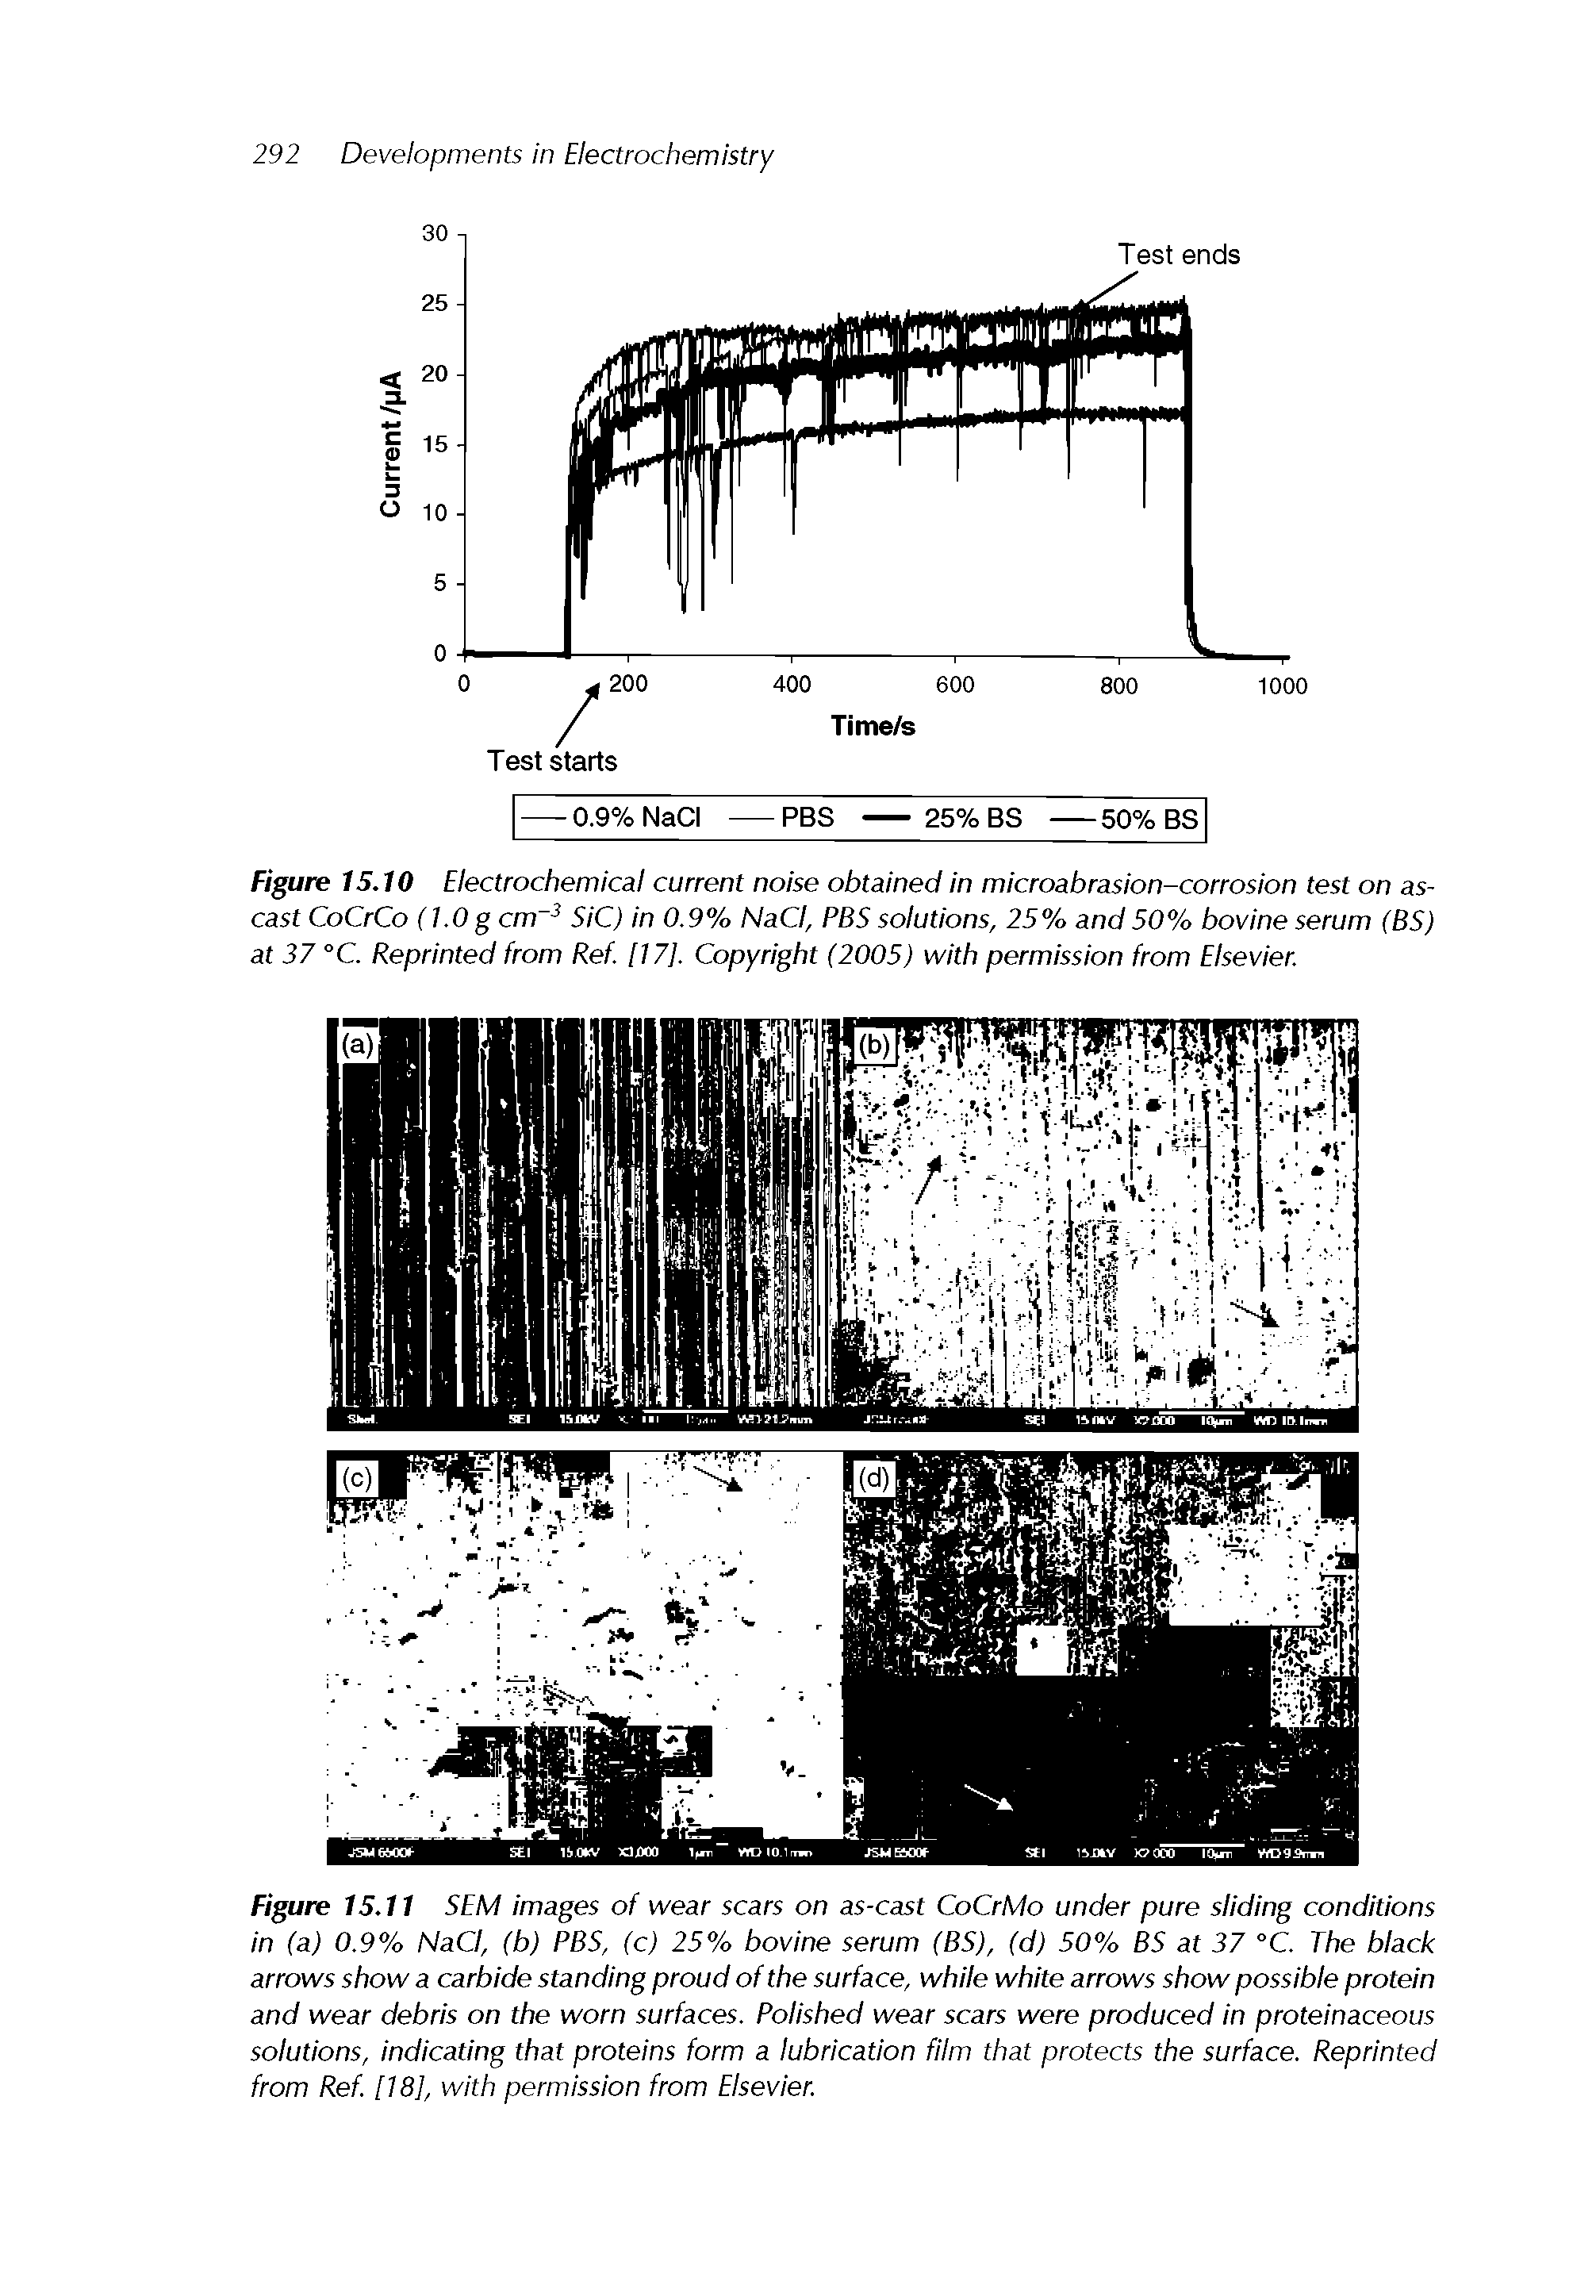 Figure 15.10 Electrochemical current noise obtained in microabrasion-corrosion test on as-cast CoCrCo (I.Og cm SiC) in 0.9% NaCI, PBS solutions, 25% and50% bovine serum (BS) at 37 °C. Reprinted from Ref [17]. Copyright (2005) with permission from Elsevier.